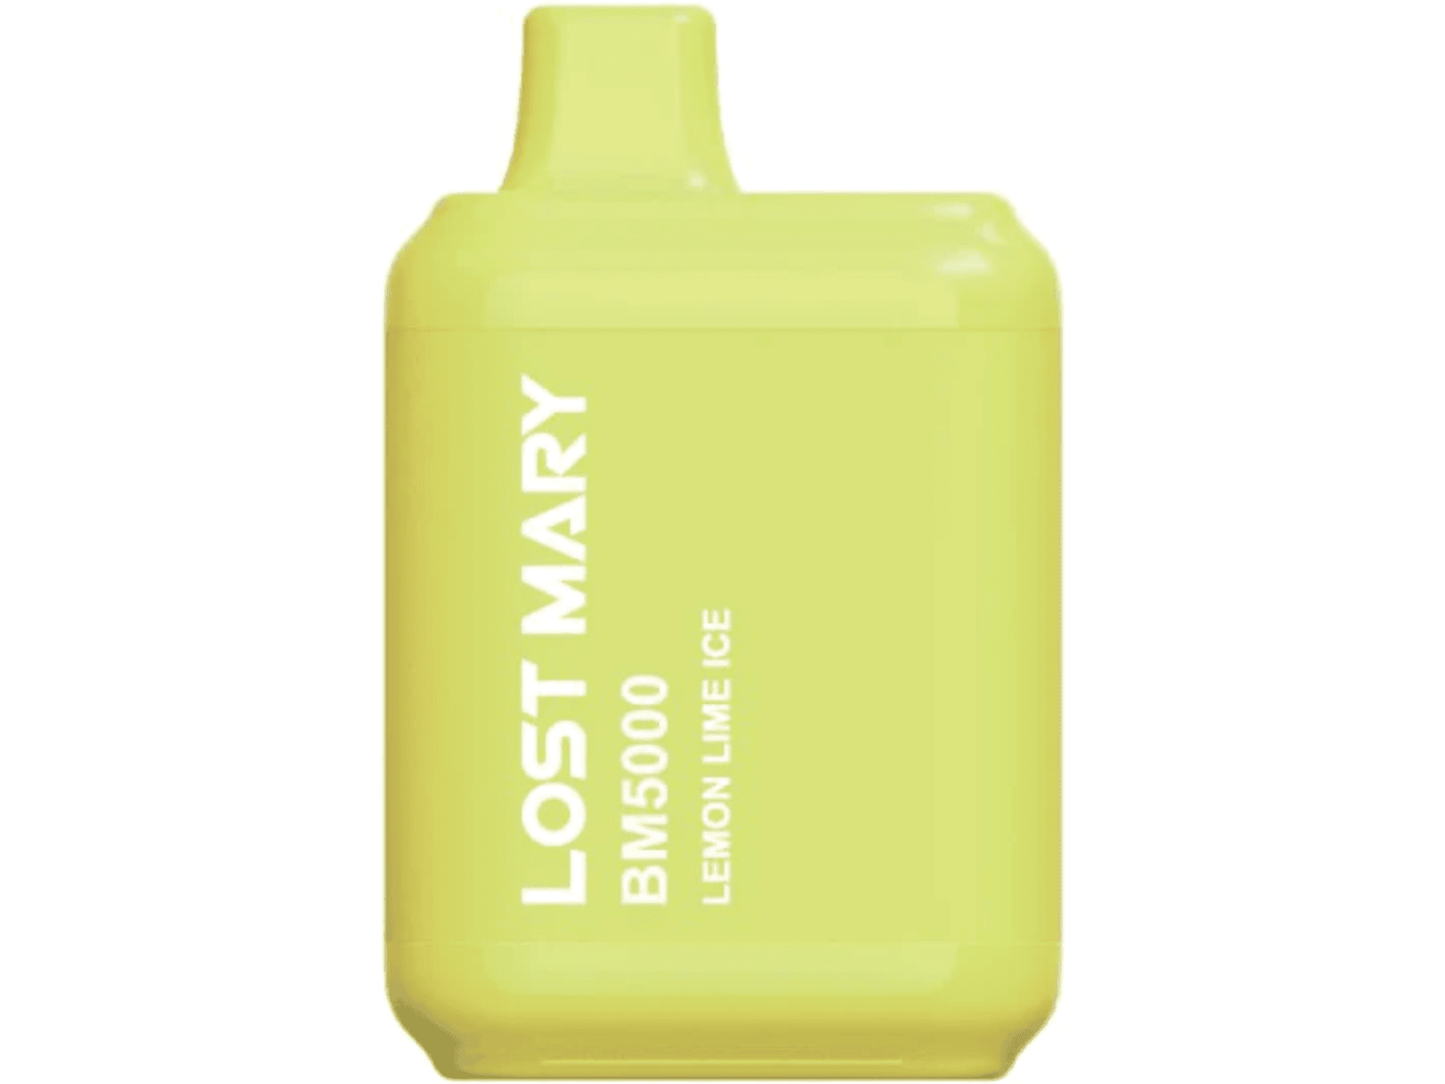 Lost Mary BM5000 Lemon Lime Ice flavored disposable vape device.